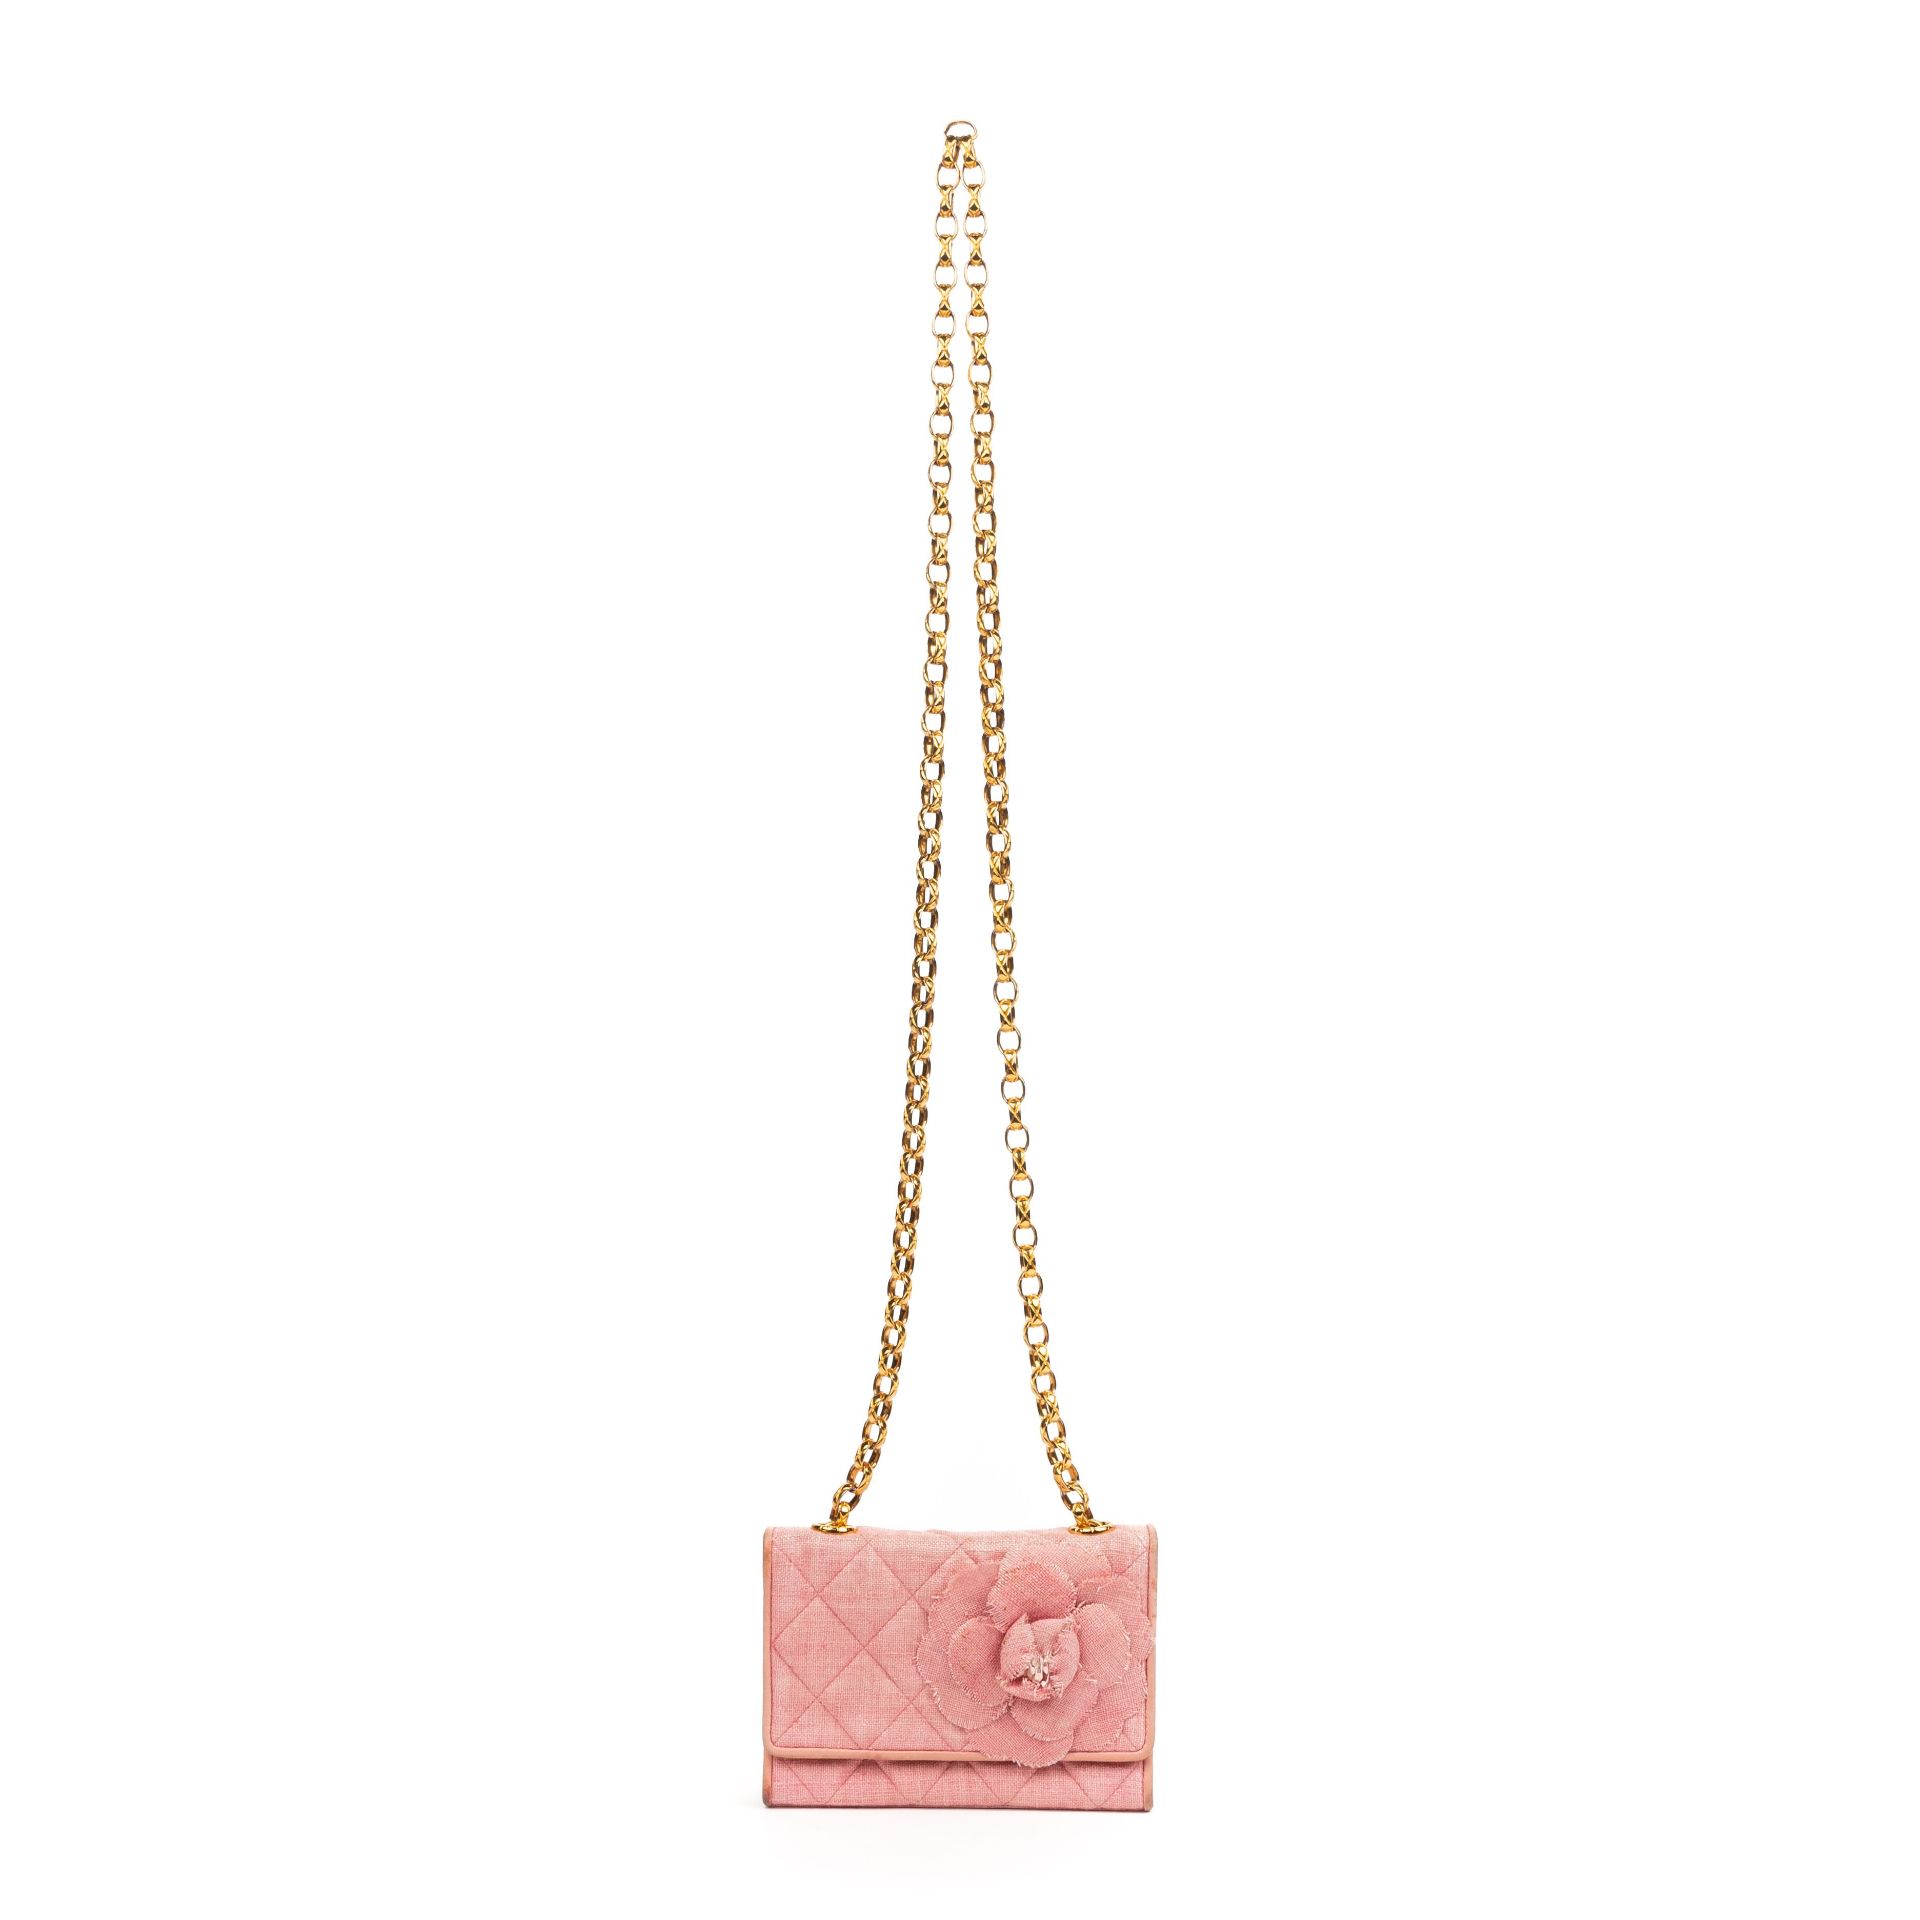 RRP £1950 Chanel Pink Canvas Fabric Shoulder Bag, Comes EAG4496 Grade AB (Please Contact Us Direct - Image 3 of 3